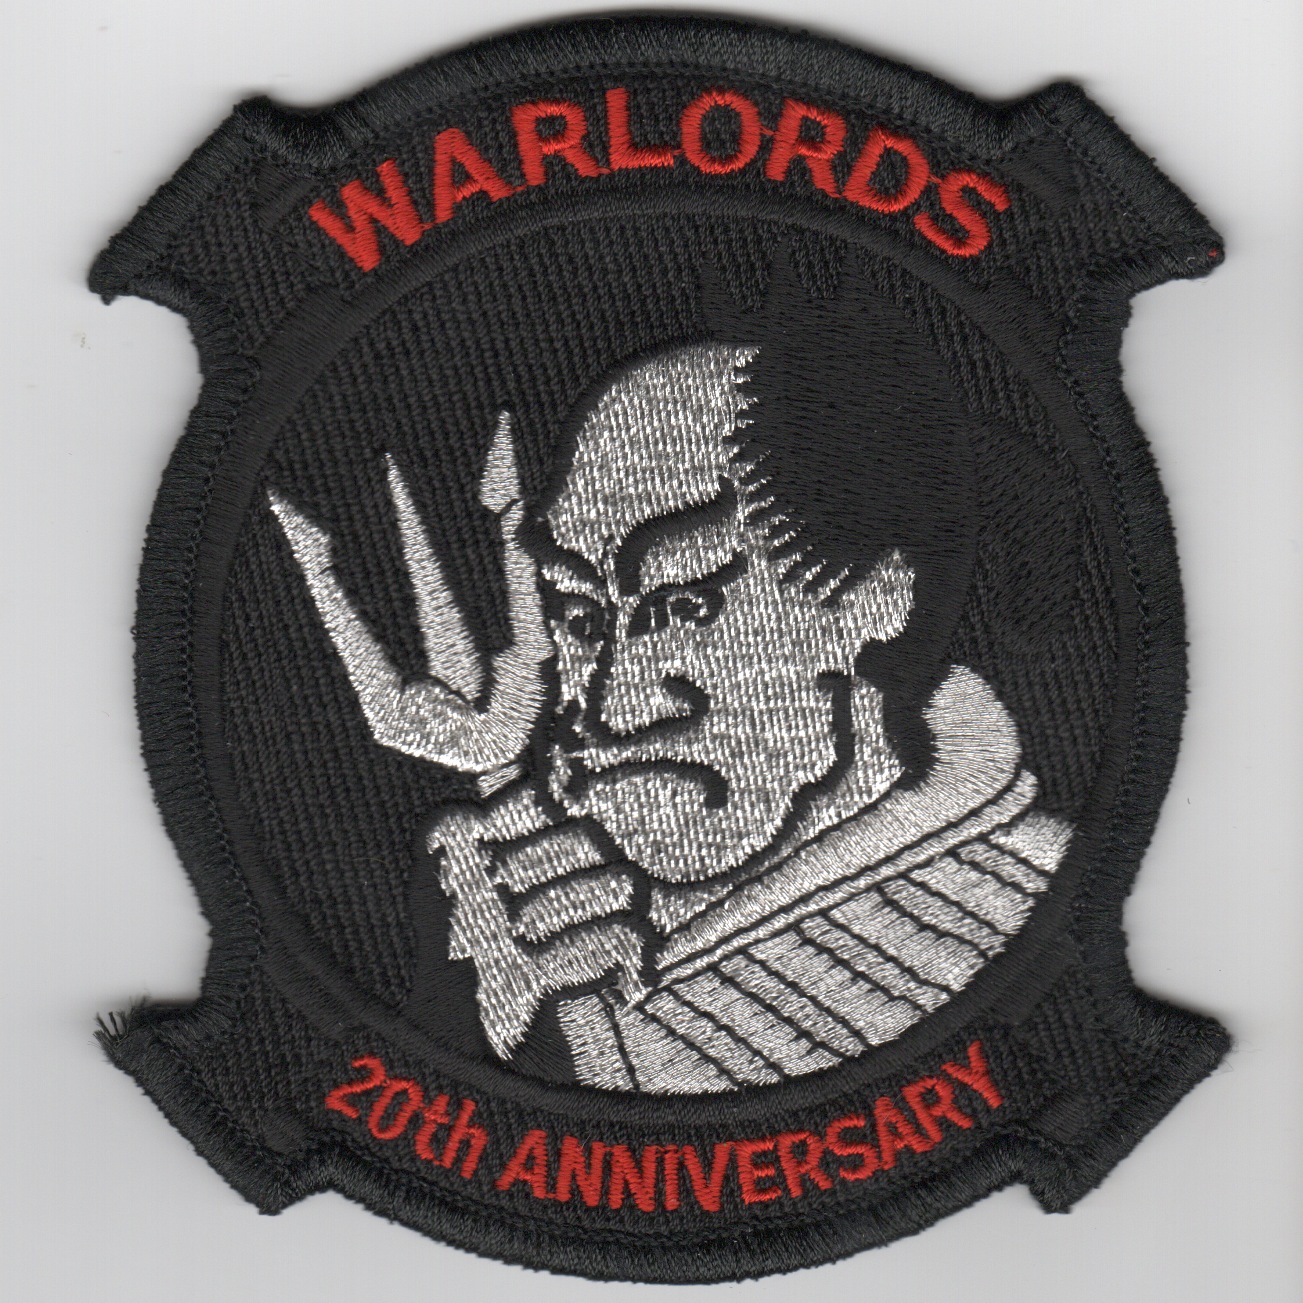 HSL-51 'Warlords' 20th Anniversary Patch